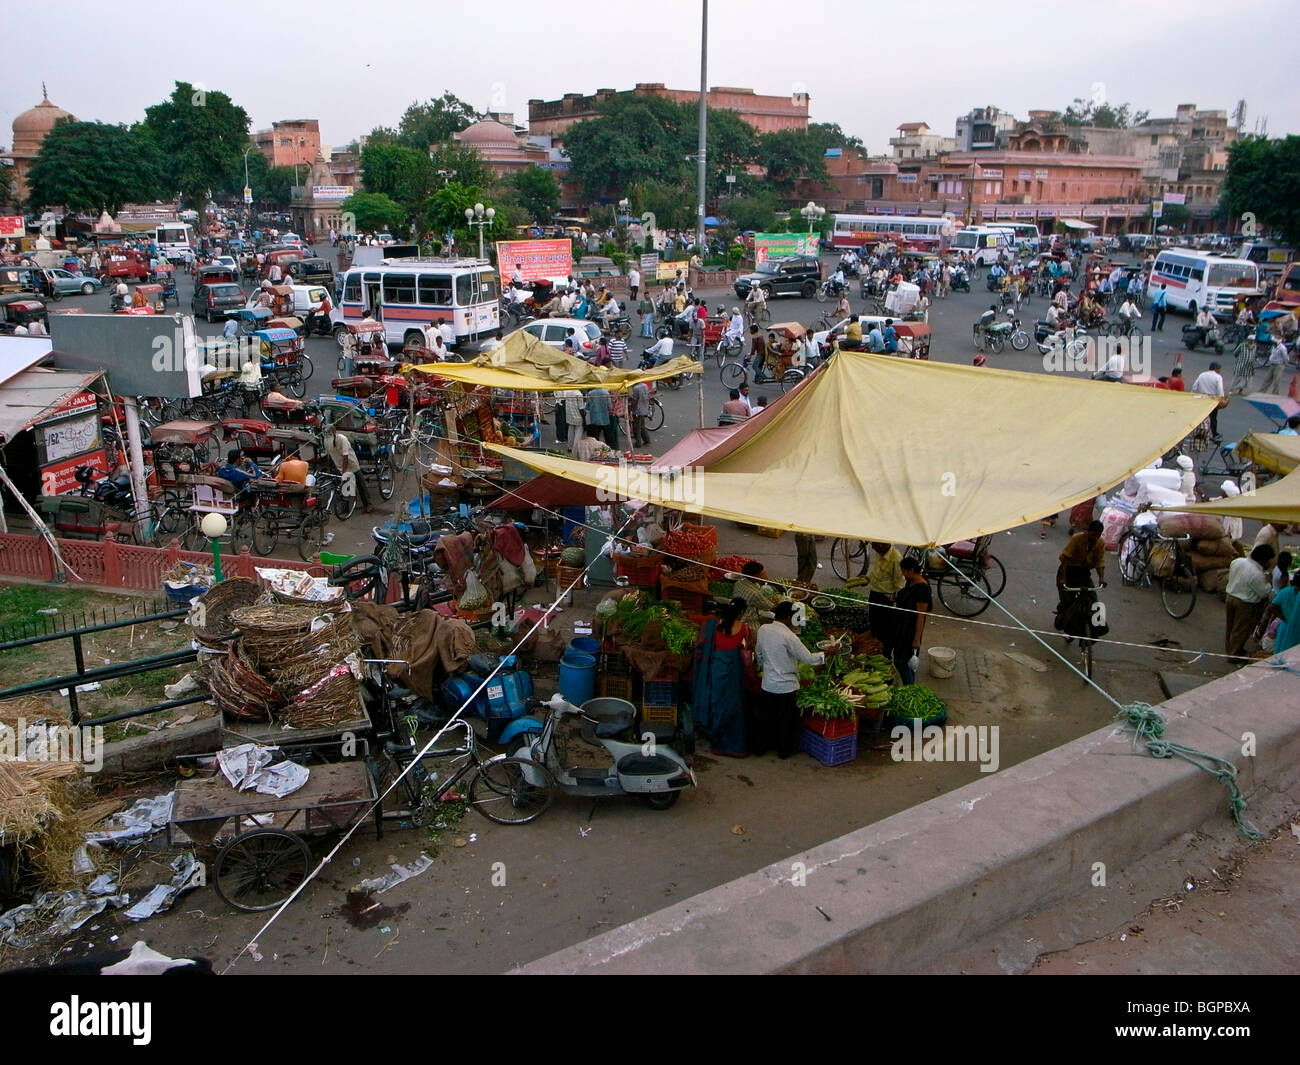 Jaipur traffic at cross roads, with vegetable vendors under canopy in foreground. Stock Photo